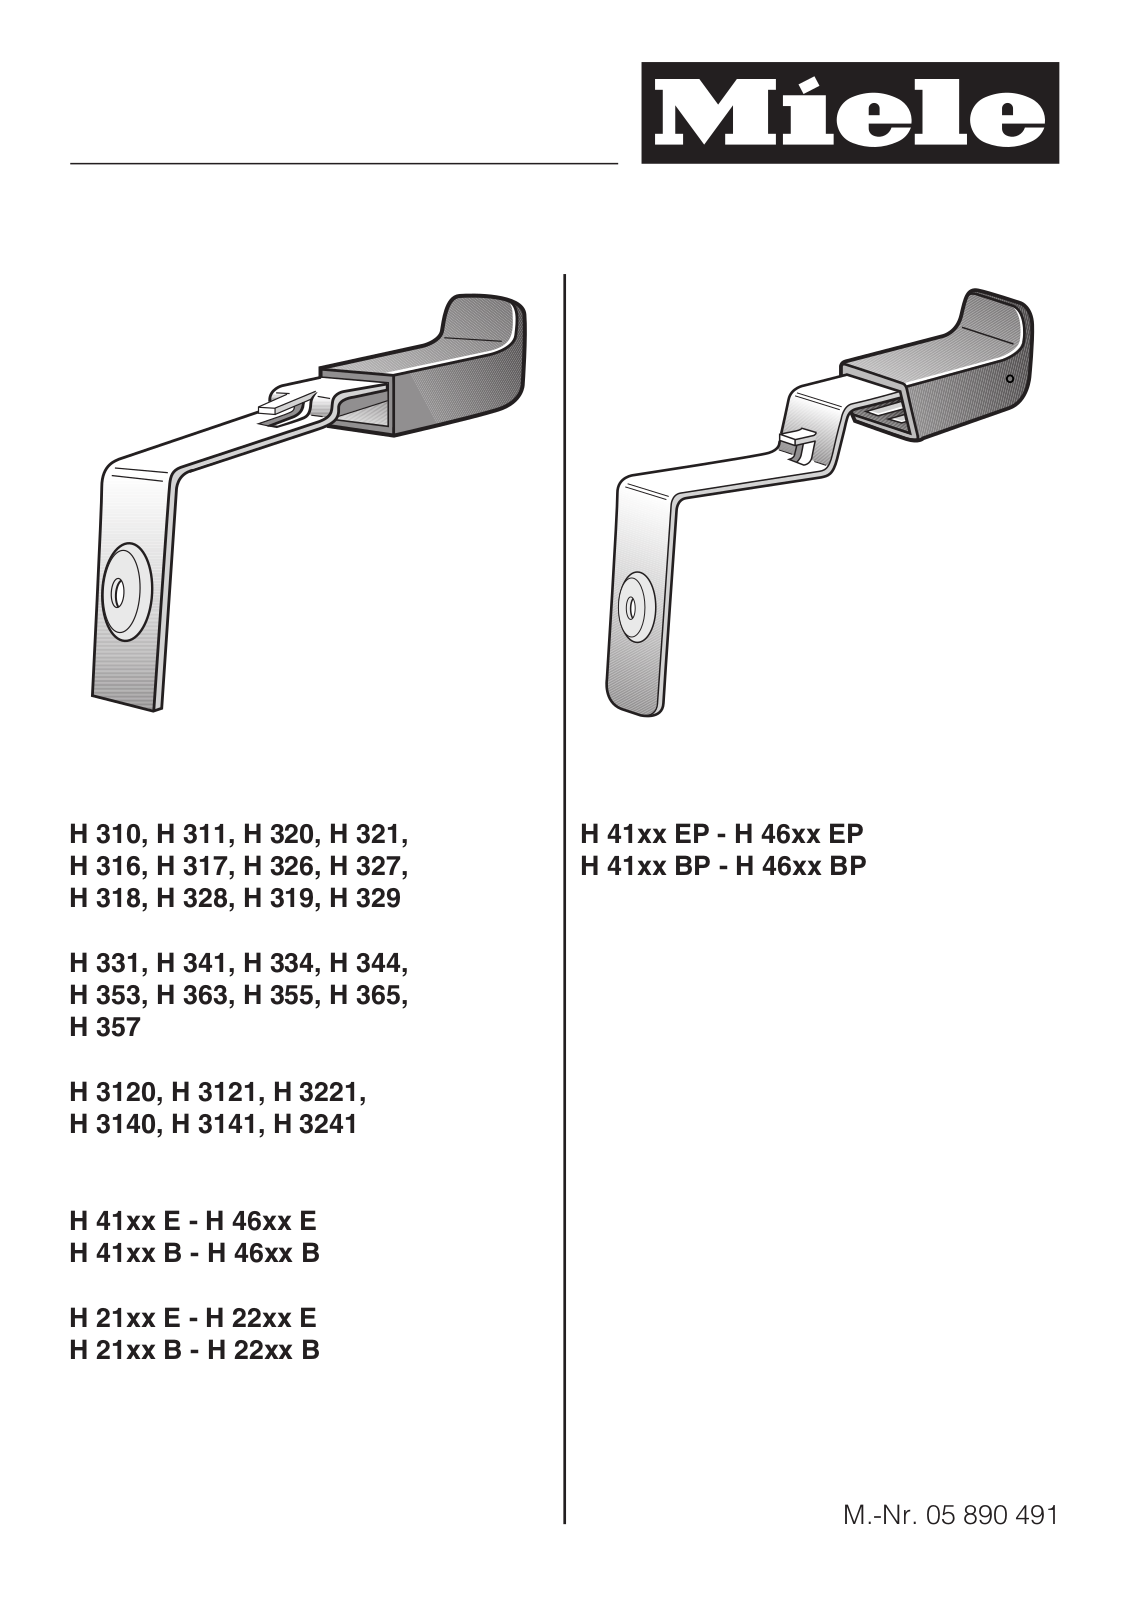 Miele H 310, H 311, H 320, H 321, H 316 Assembly instructions